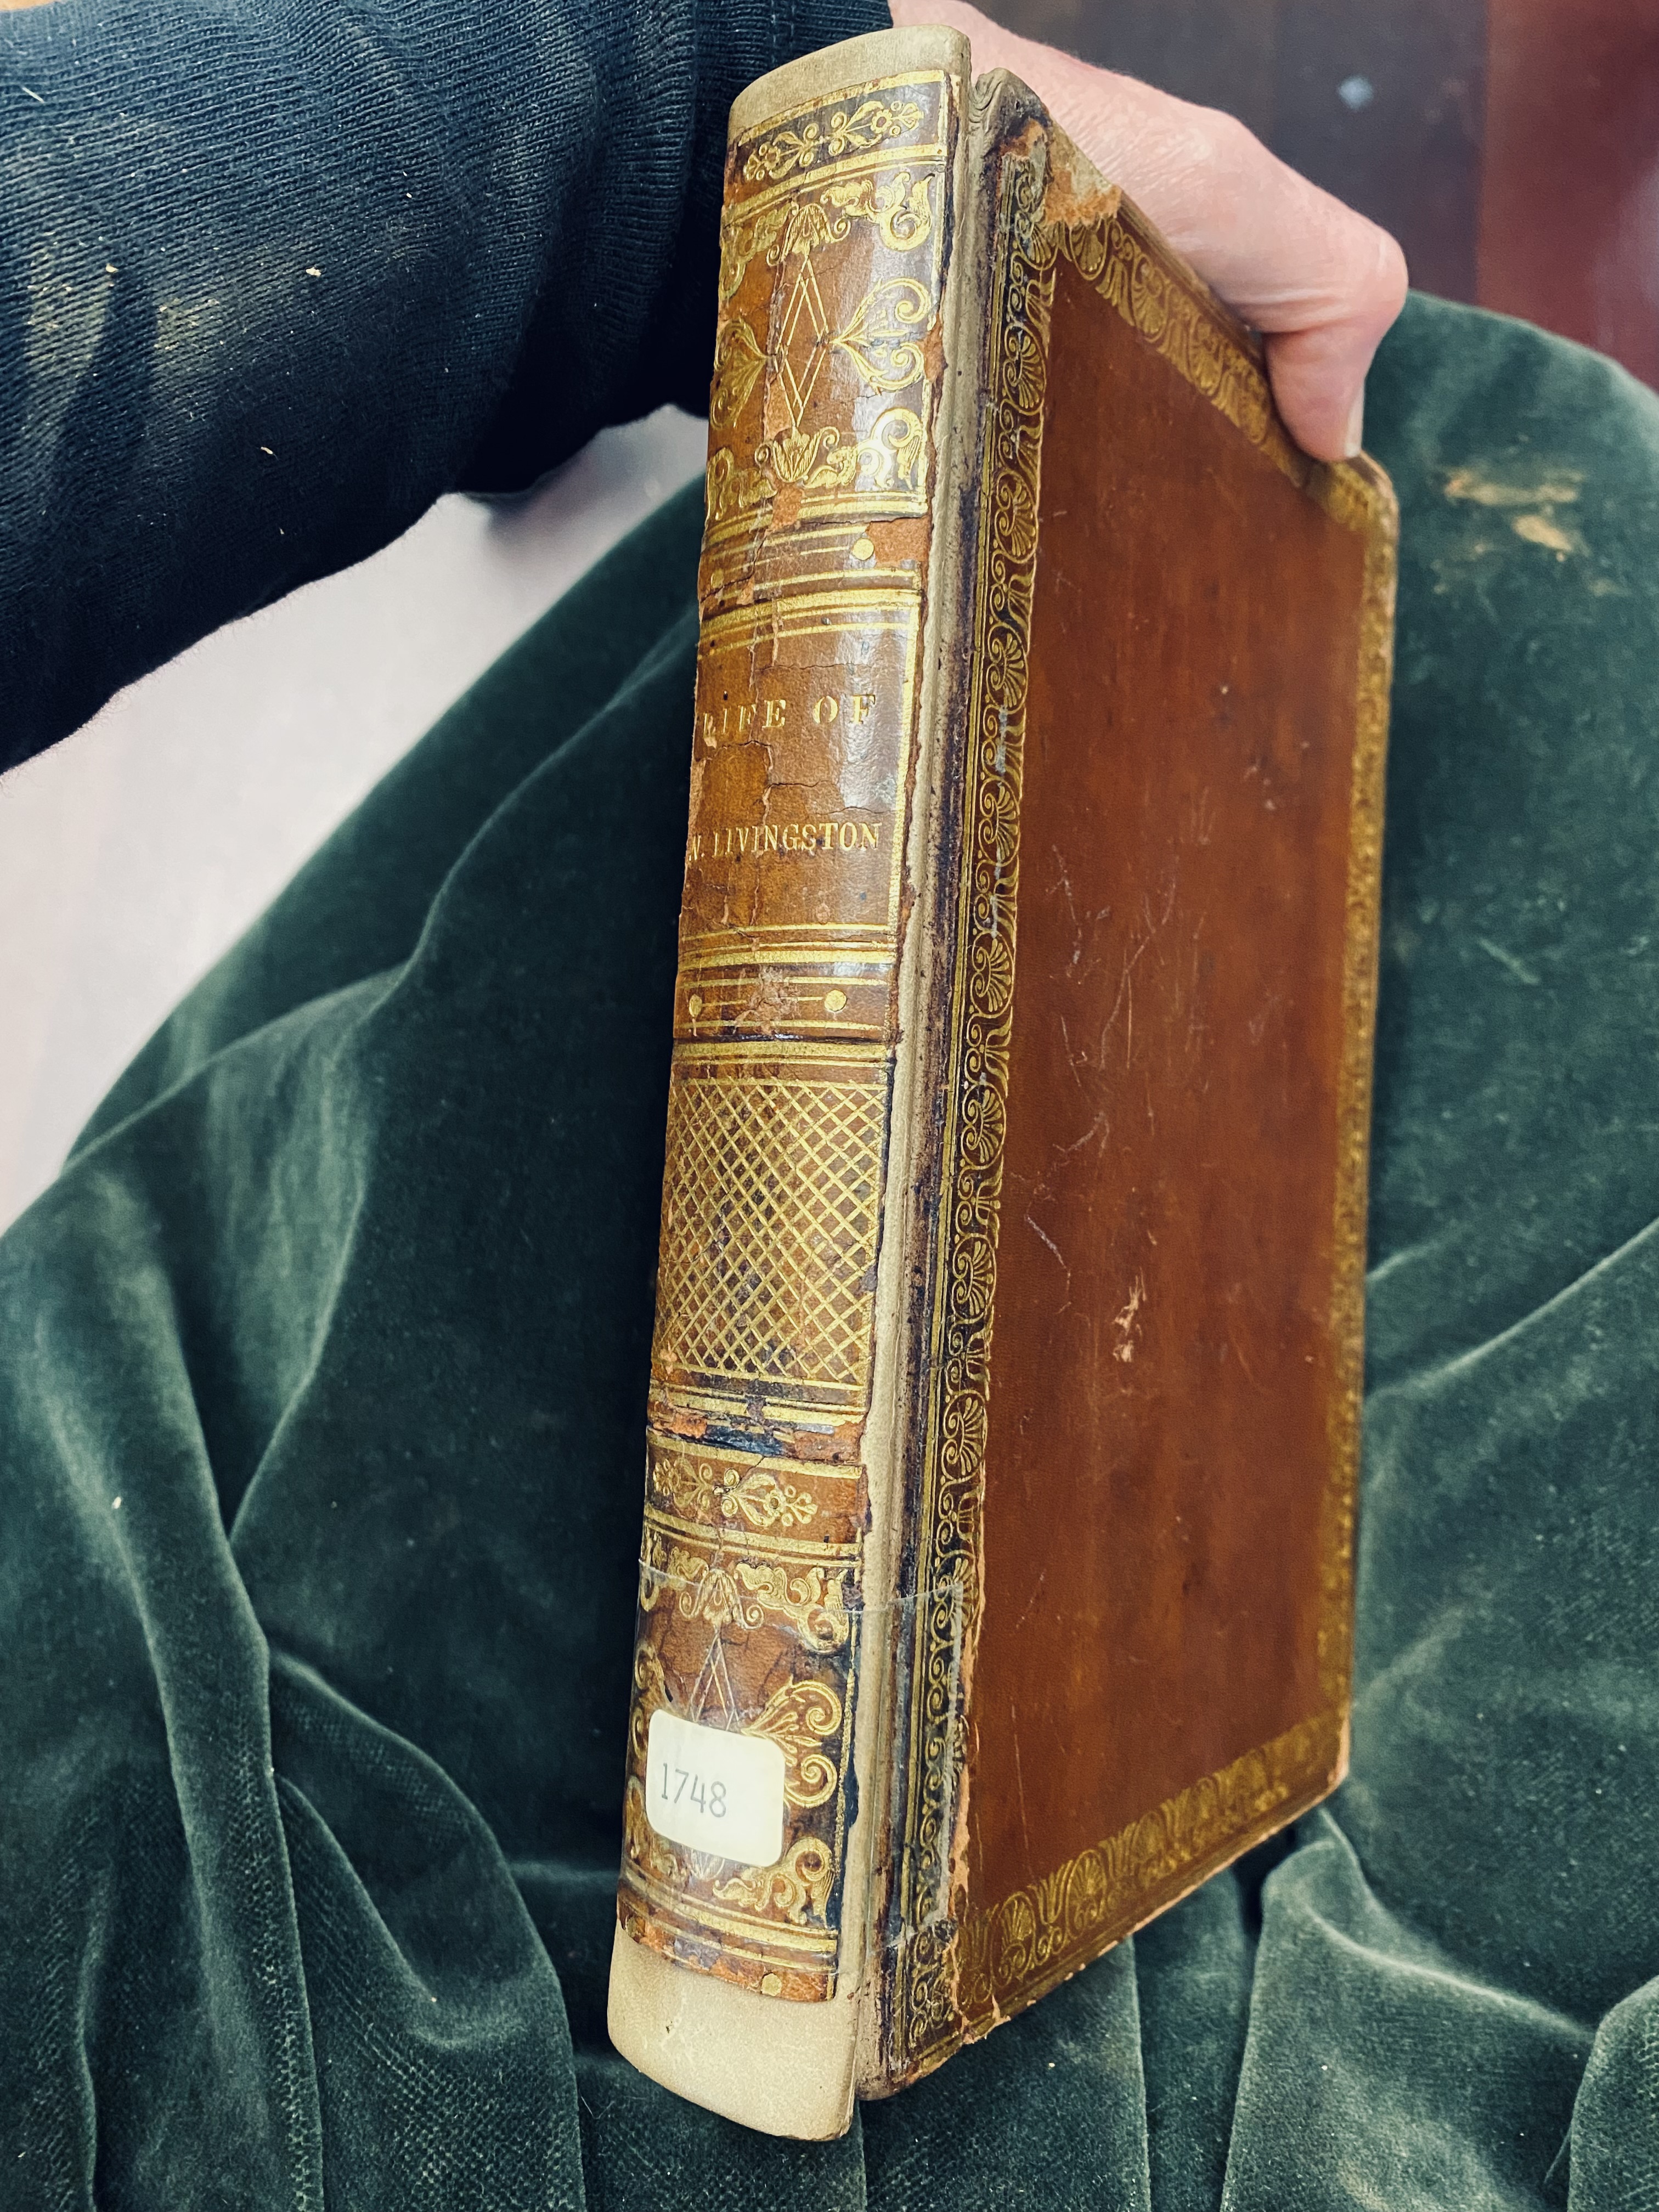 photo of book spine held by hand at top and velvet pillow beneath